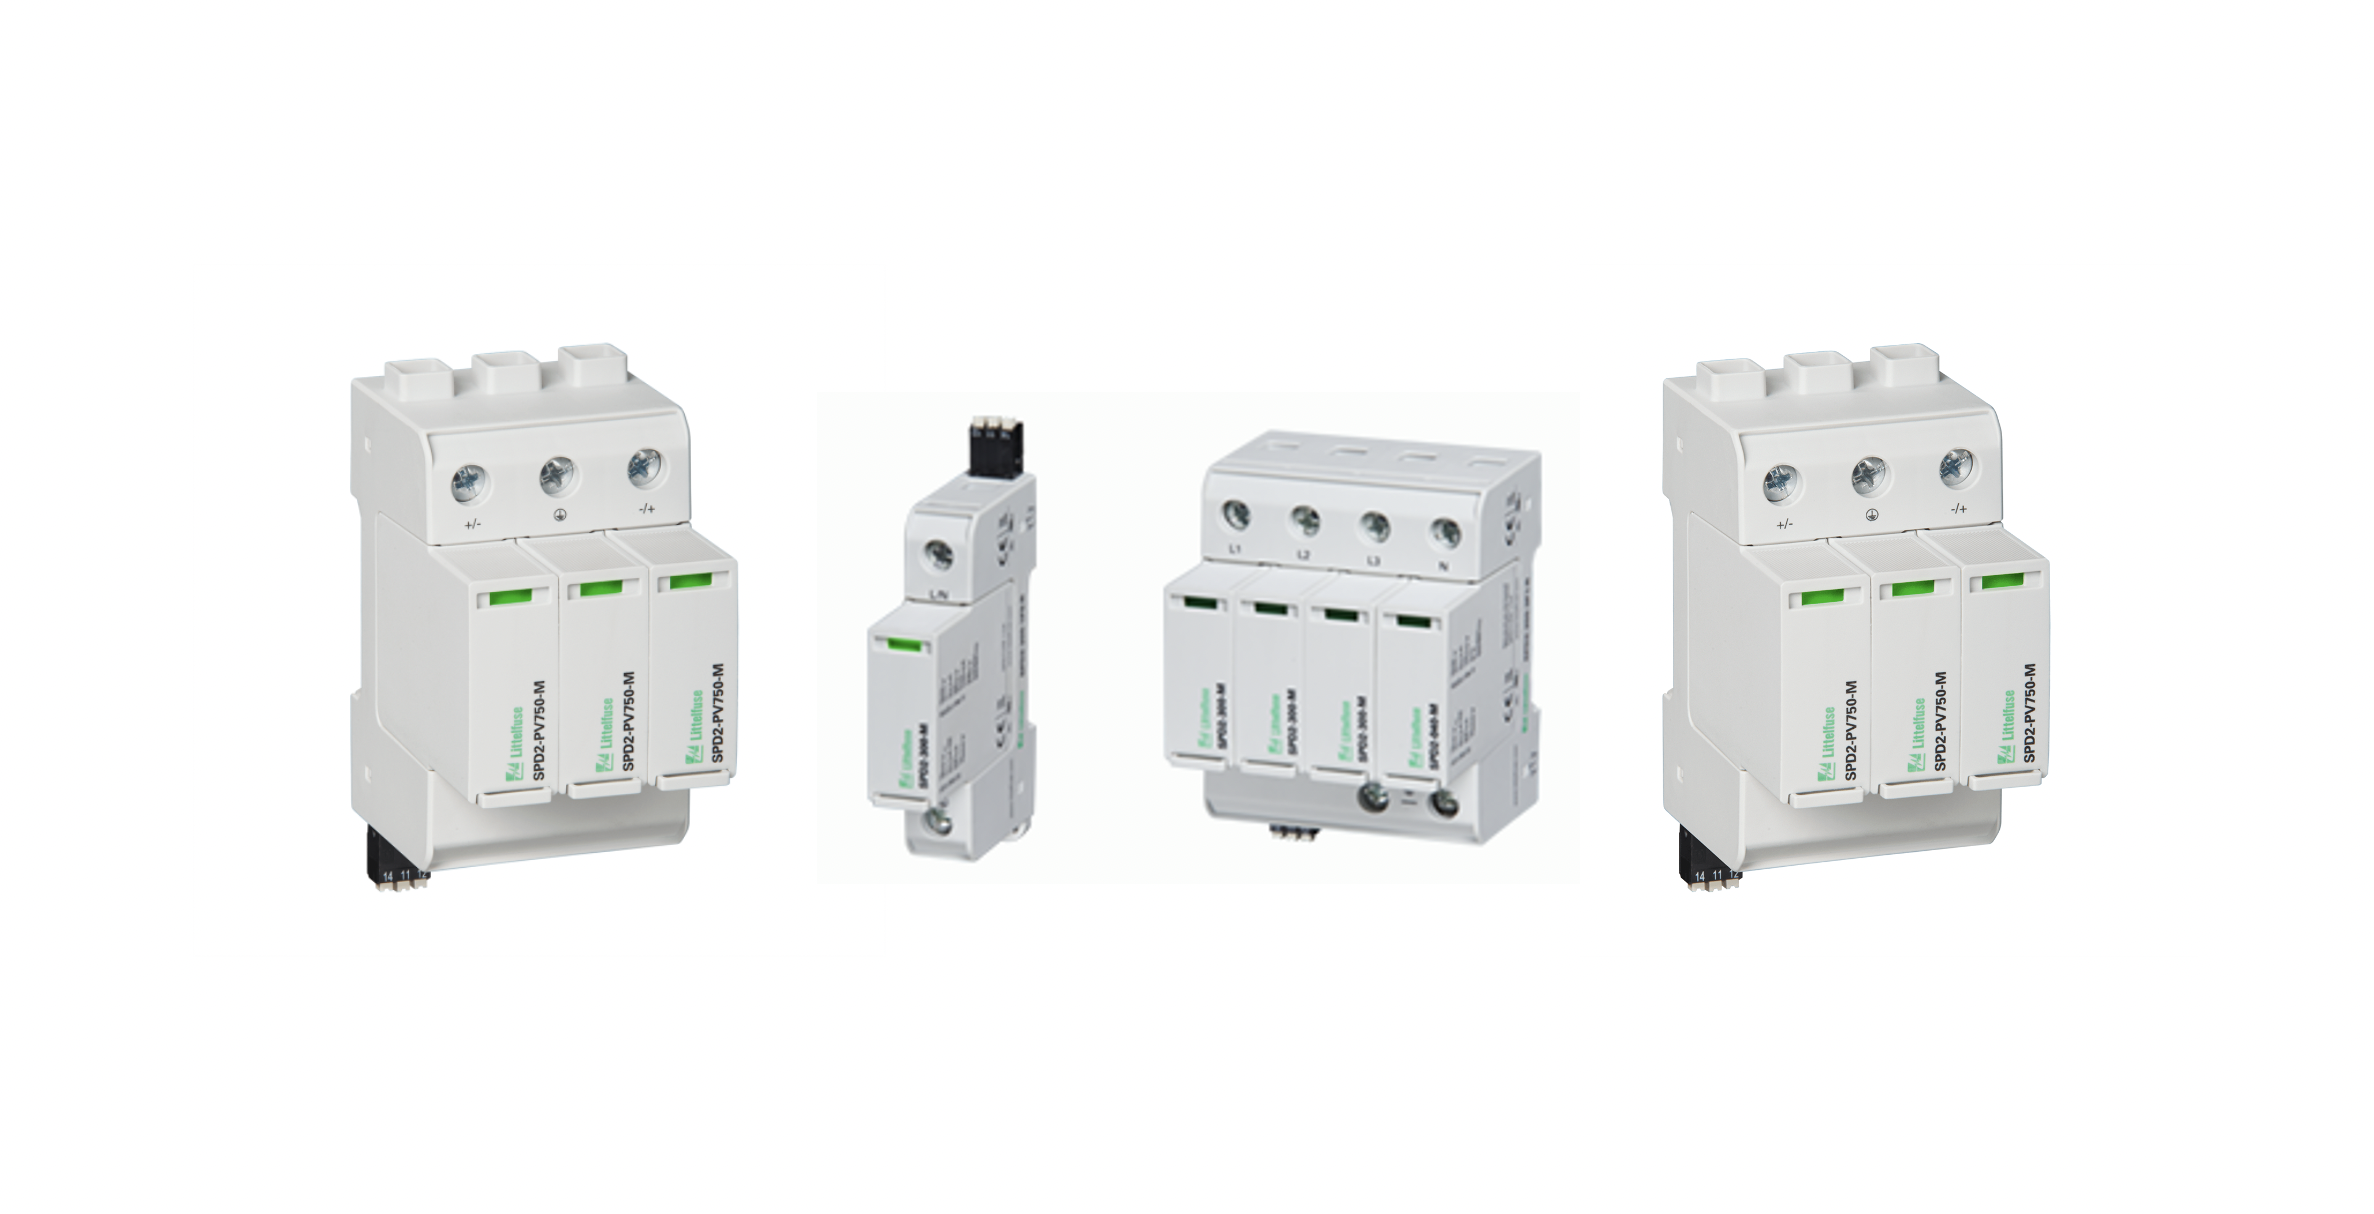 Solar surge protection devices